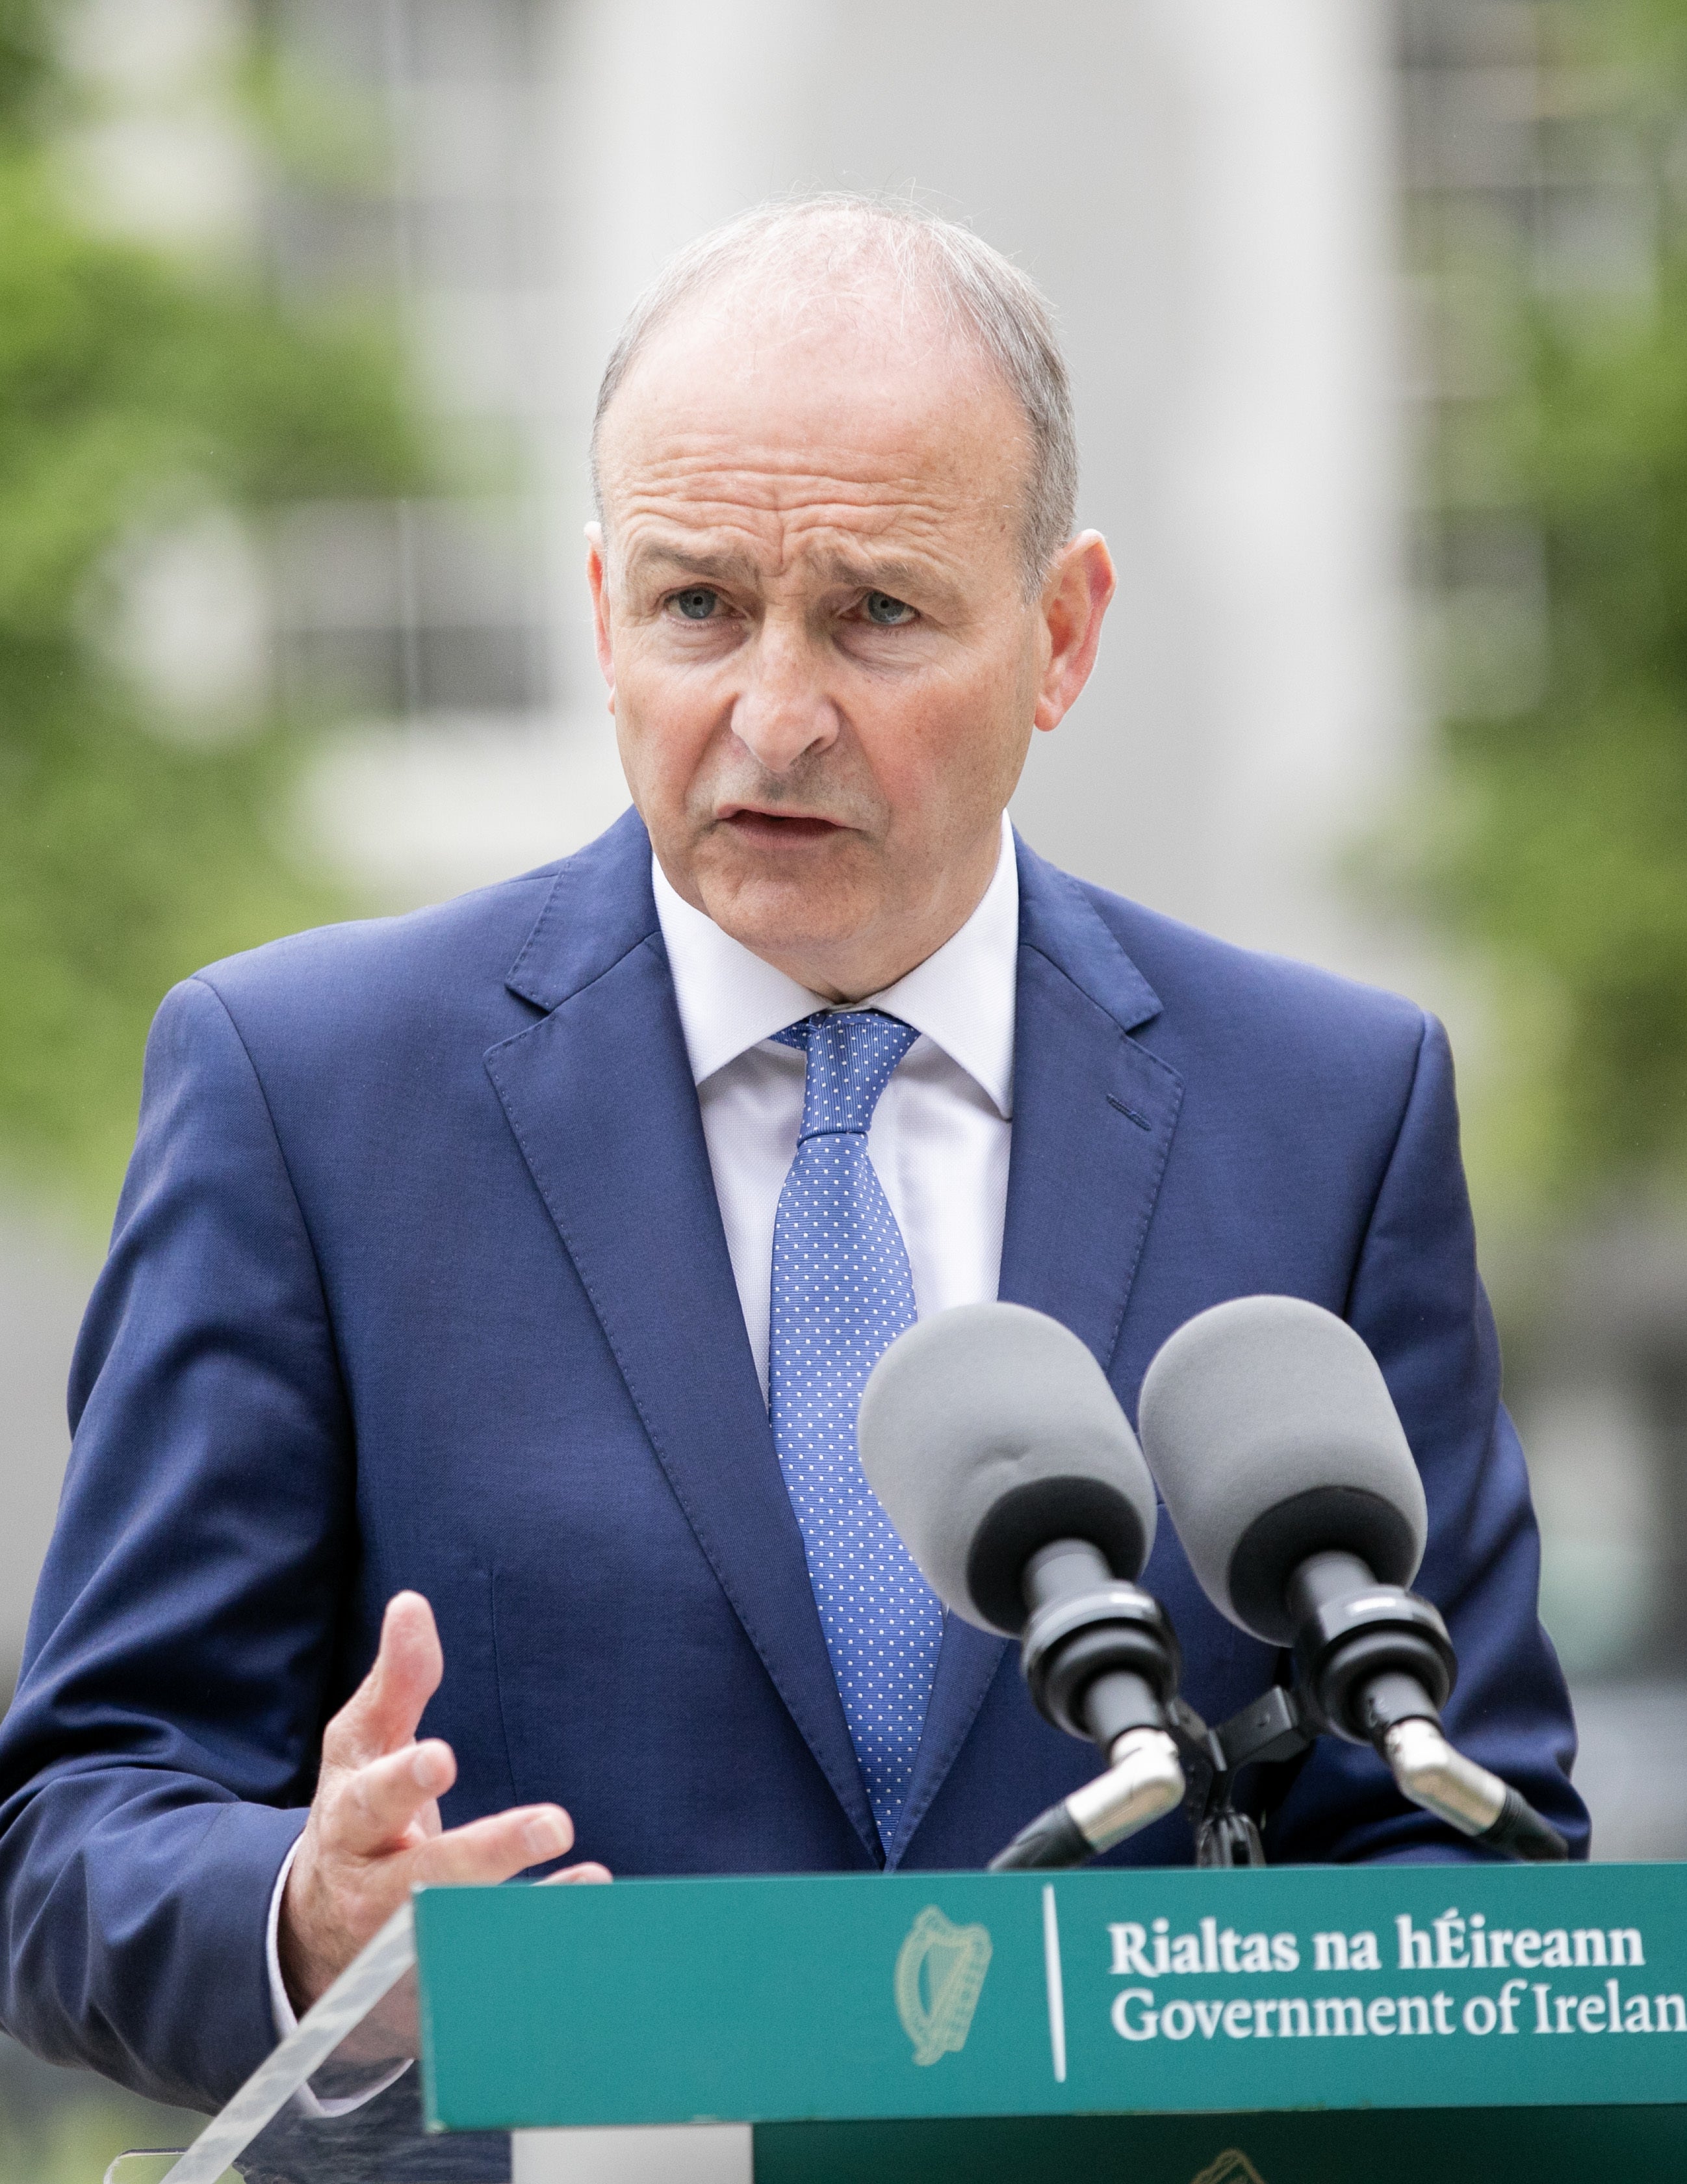 Micheal Martin, pictured, said he had congratulated David Lammy on Labour’s election victory and his appointment to his new role (Gareth Chaney/PA)